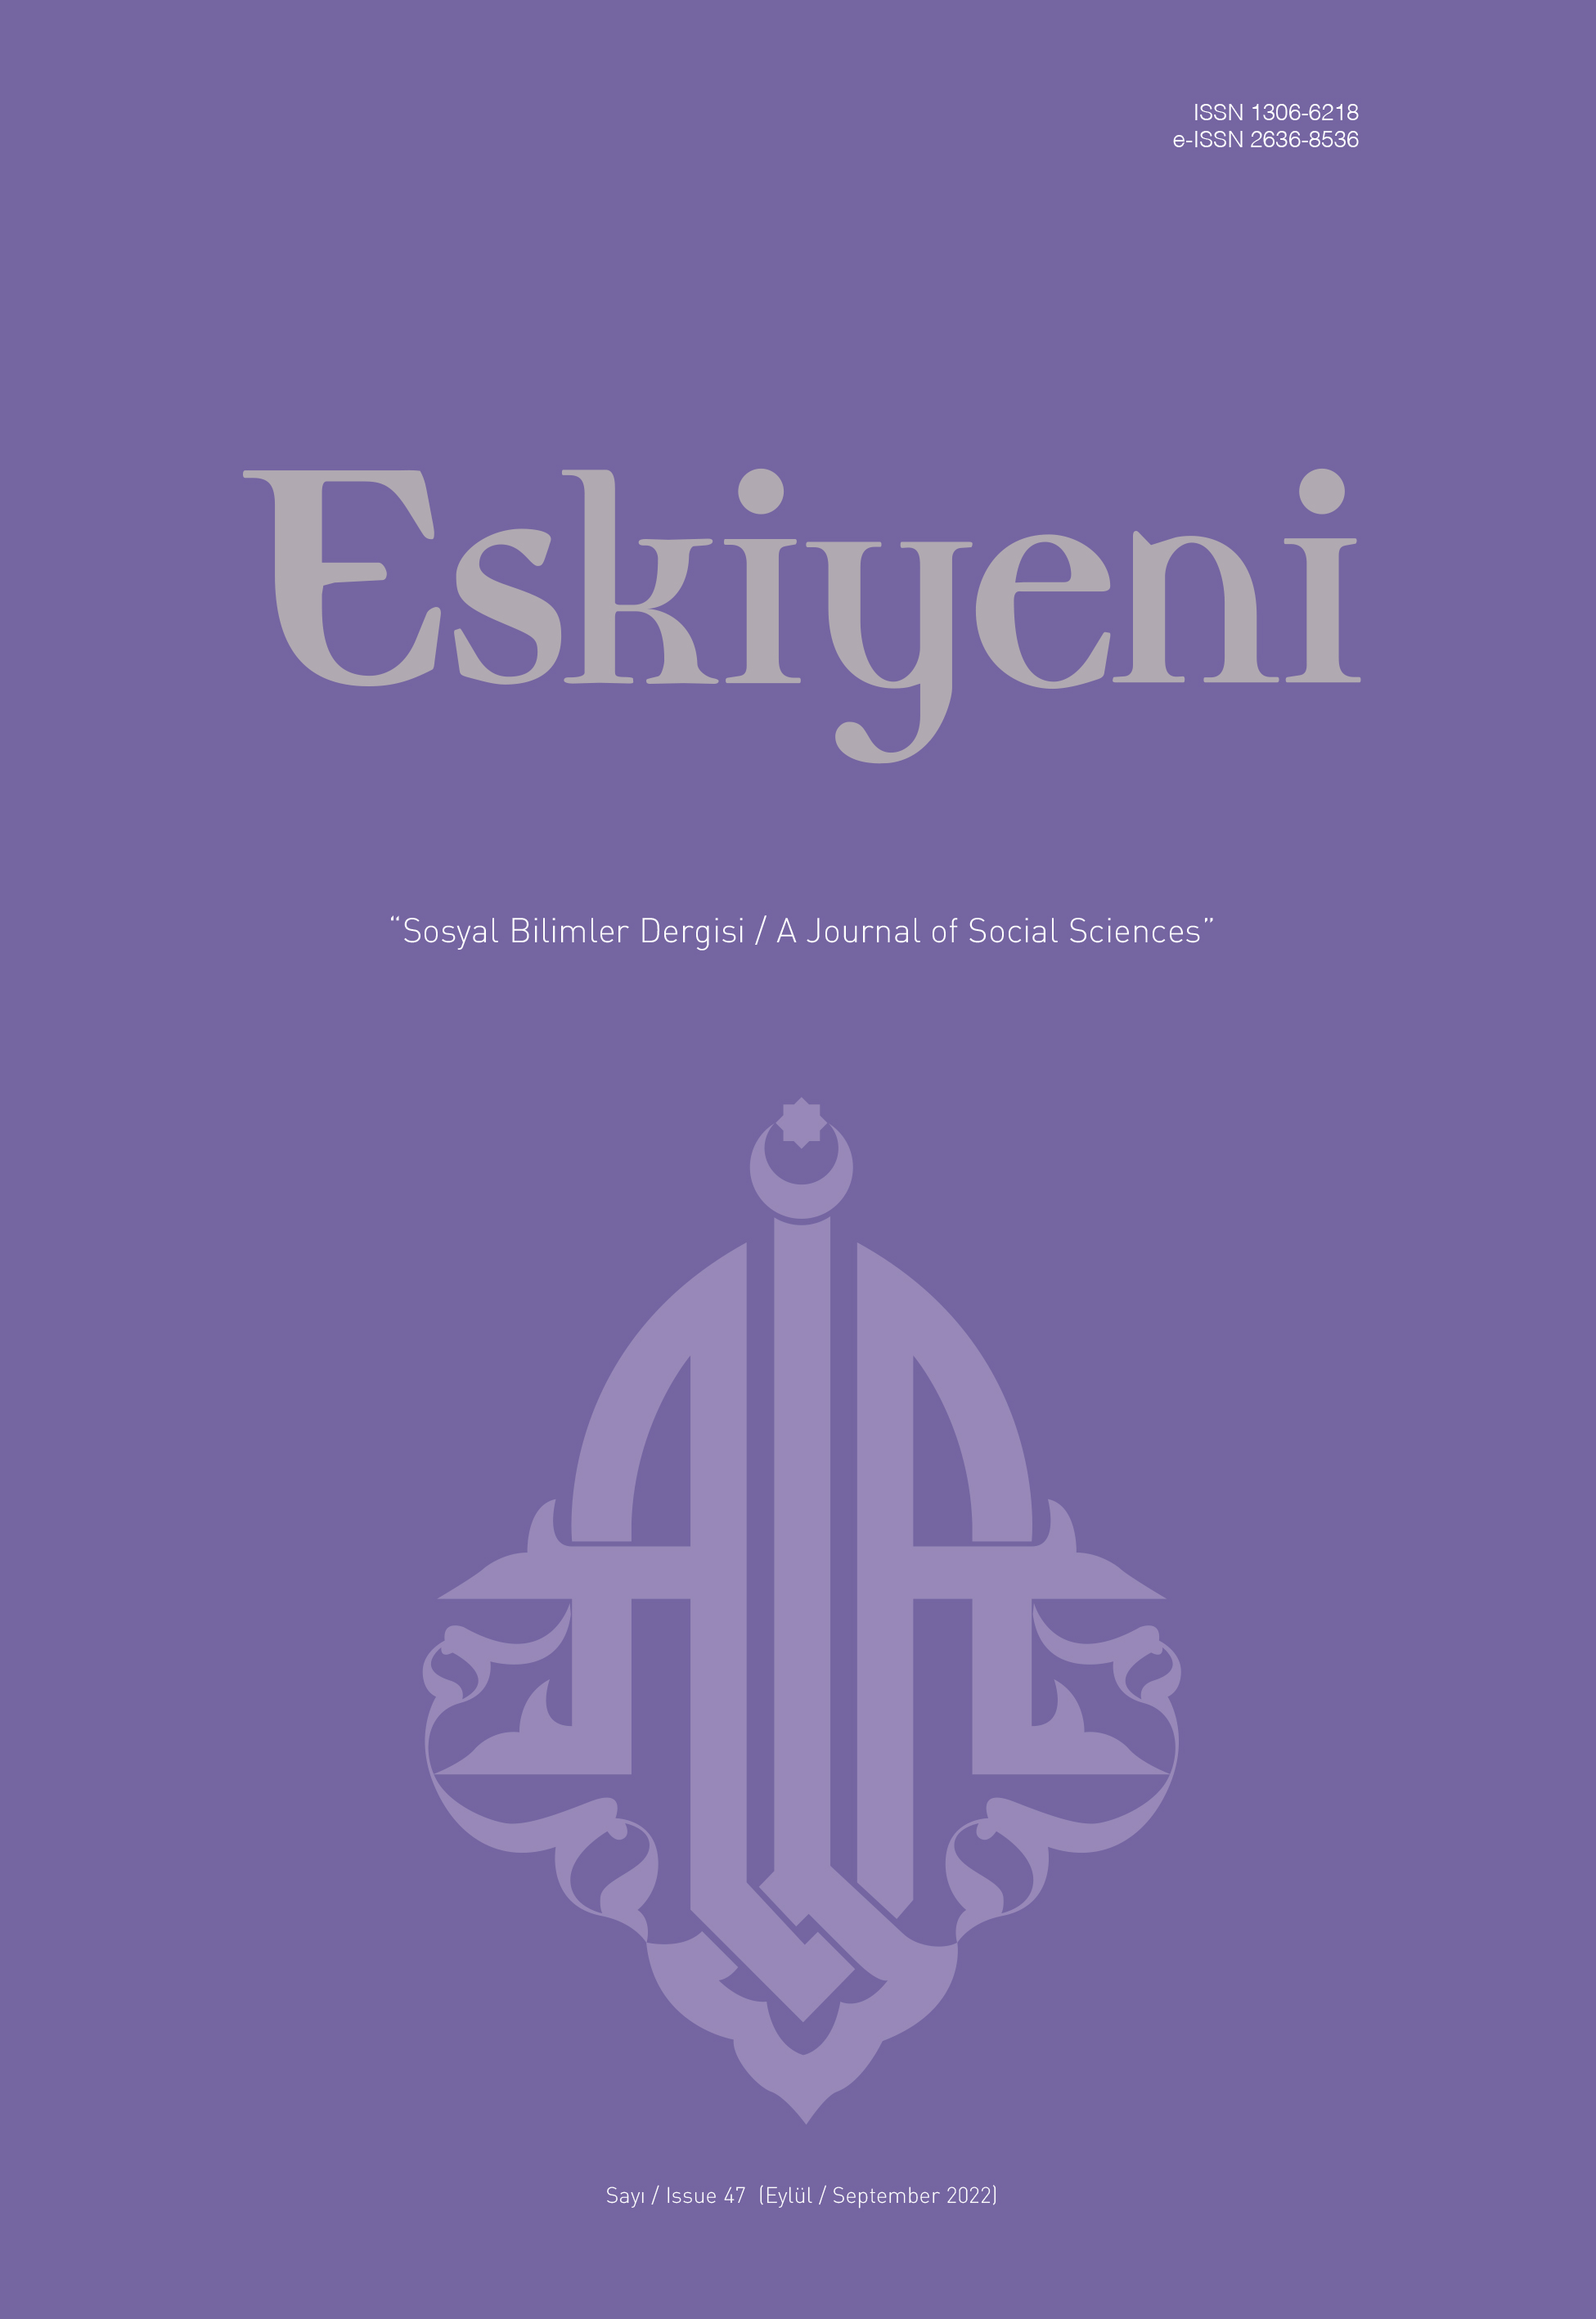 Interventions in the Human Genome: Ethical Discussions-Jurisprudential (Fıqhi) Approachesby Ülfet Görgülü (Ankara: Turkish Diyanet Foundation Publishing, 2021), XII+210 pages, ISBN 978-625-7672-44-3 Cover Image